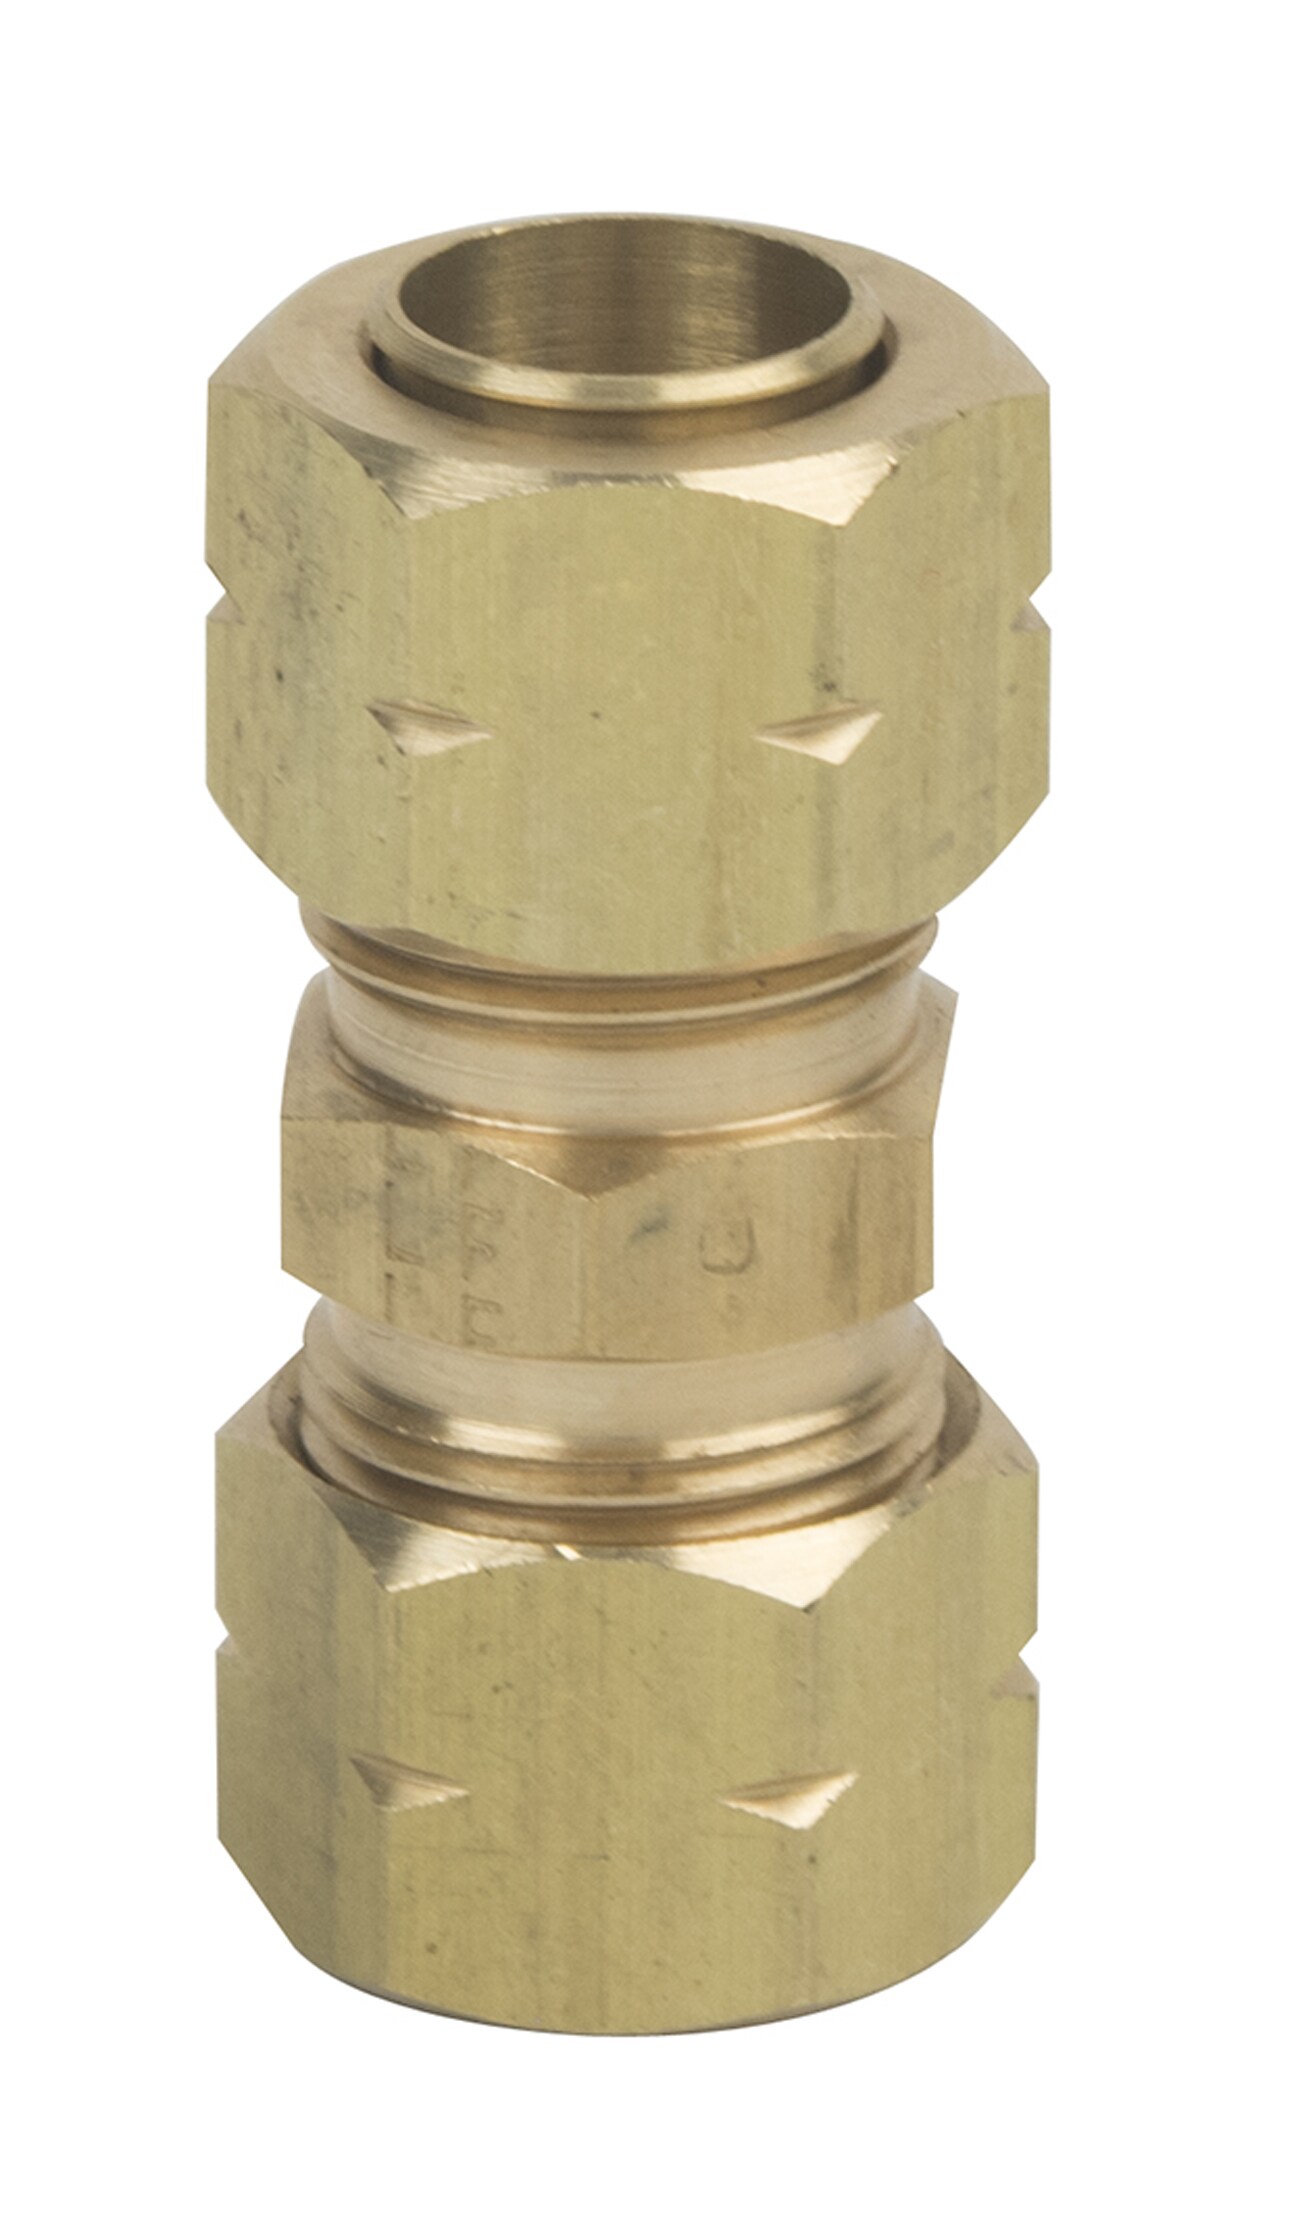 62P-8 - Brass Compression Fittings for Thermoplastic and Soft